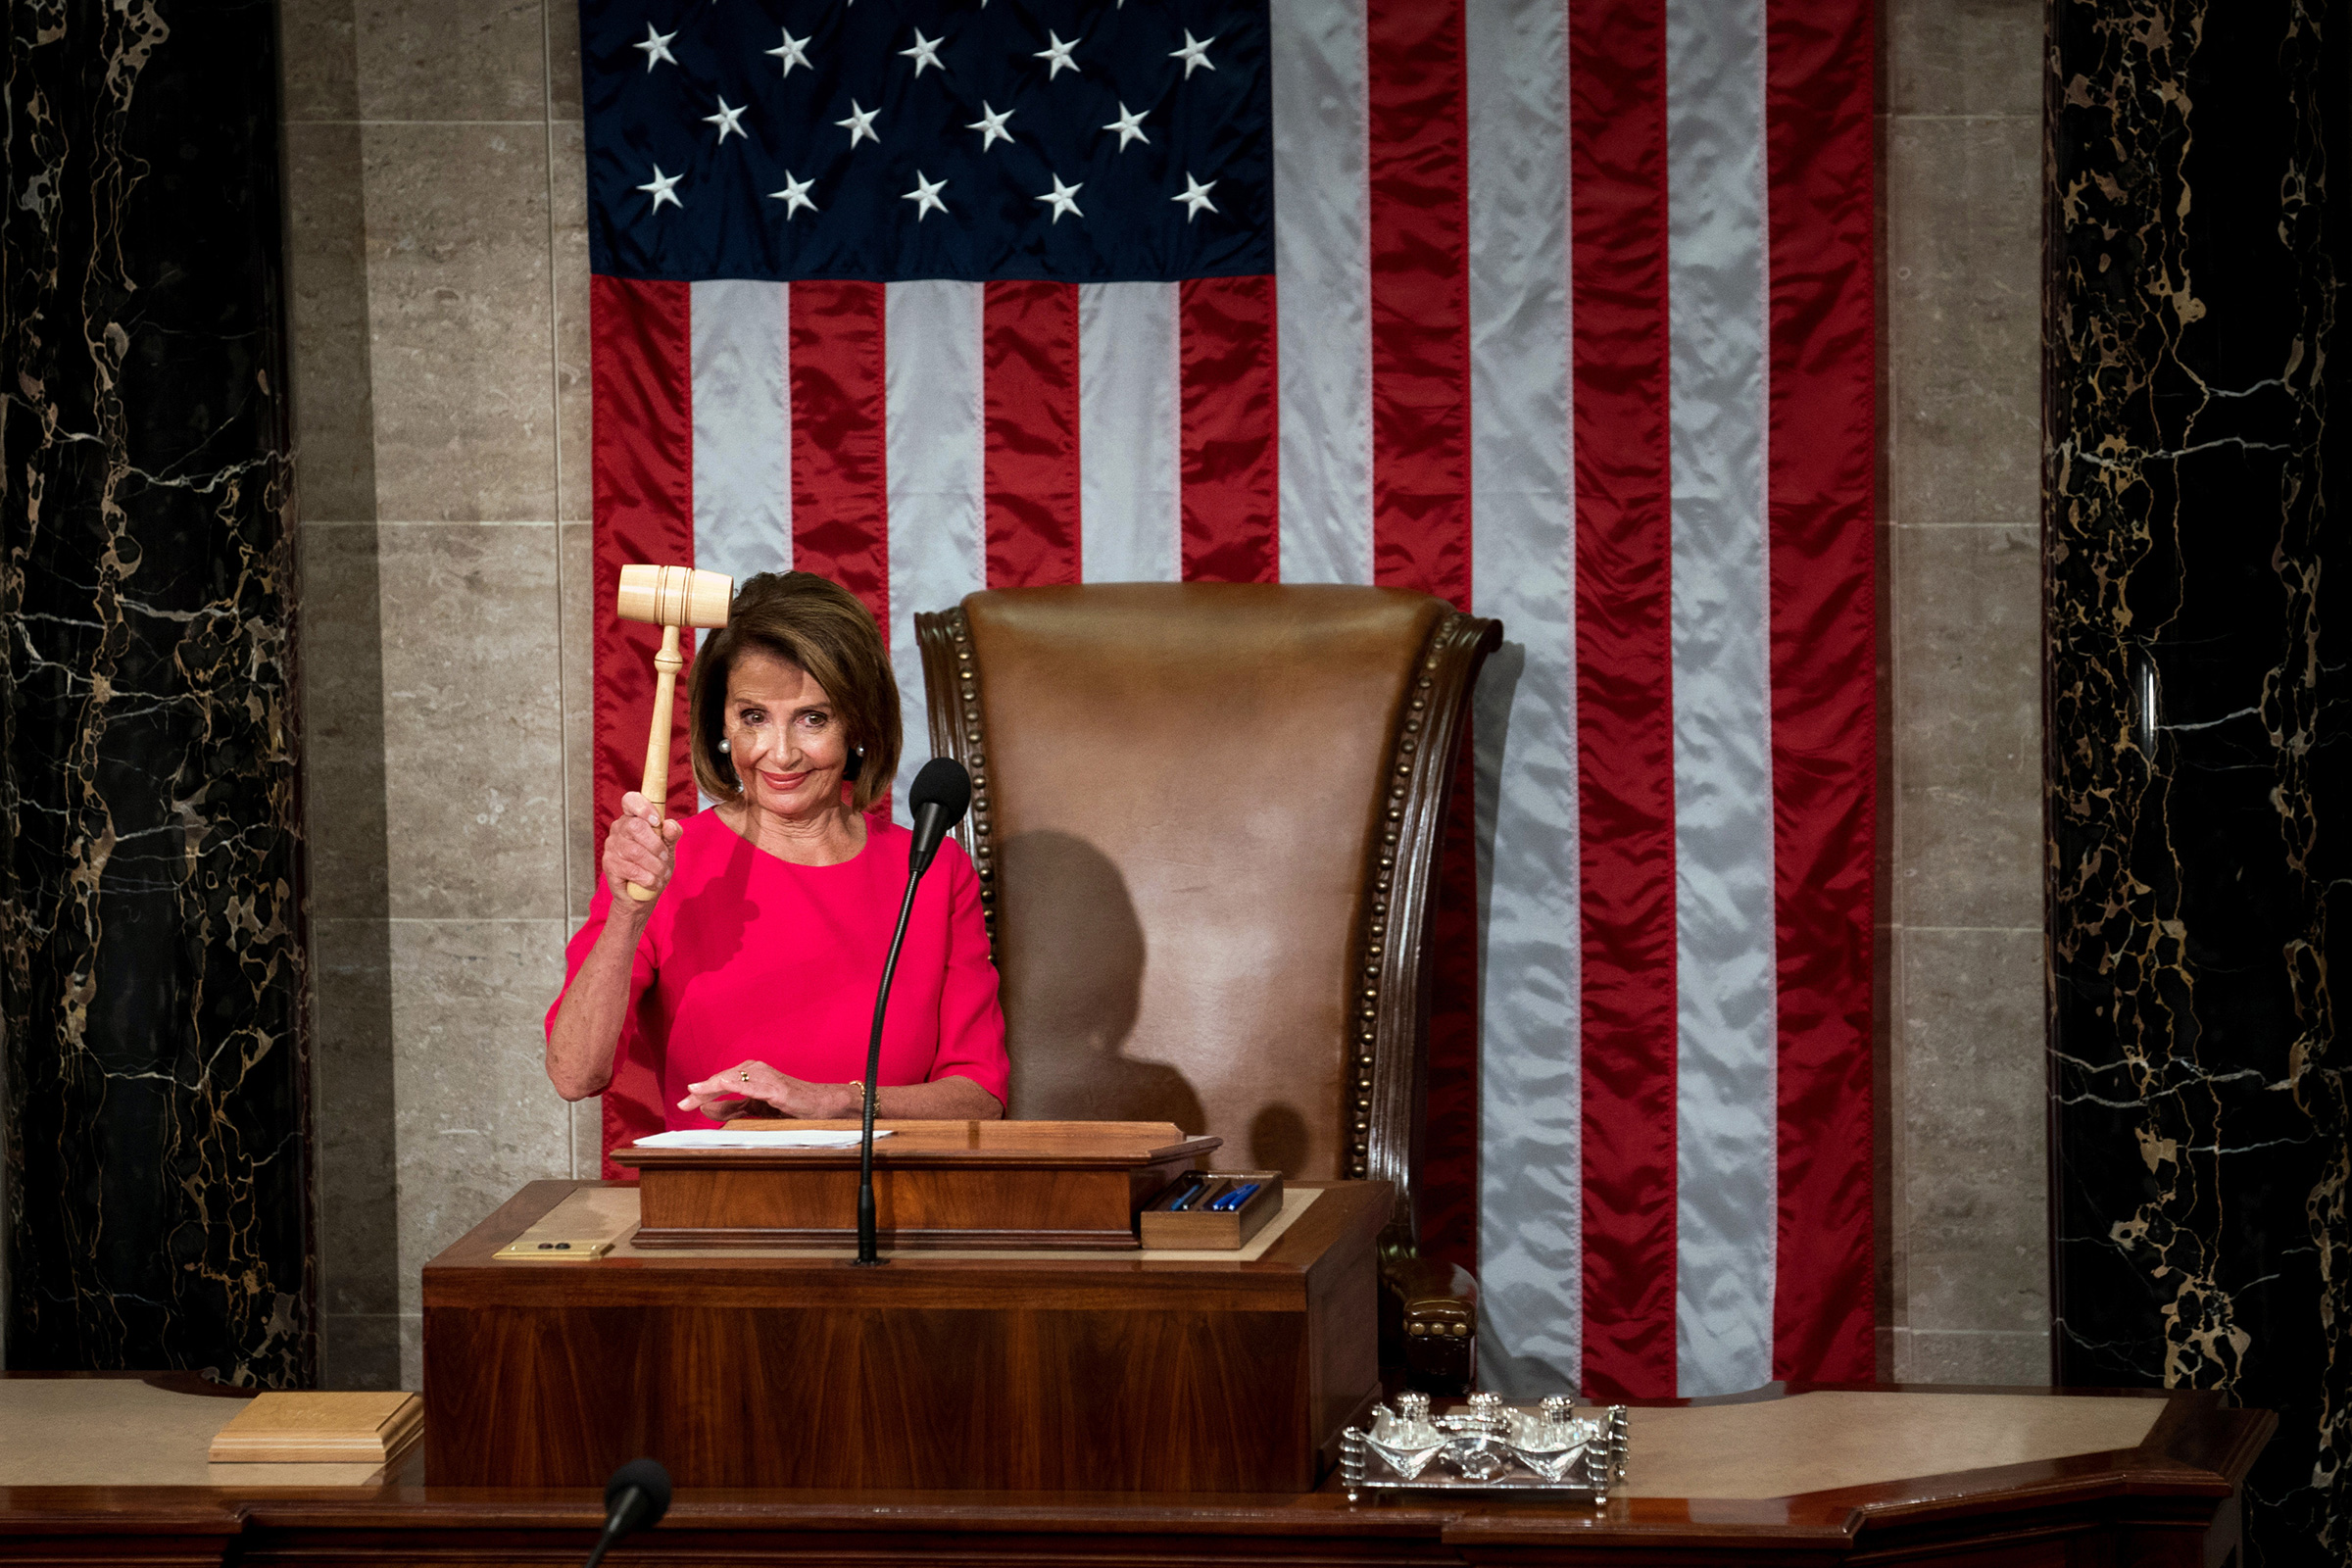 Rep. Nancy Pelosi wields the gavel after her election as Speaker of the House at the Capitol in Washington, D.C. on Jan. 3, 2019. (Erin Schaff—The New York Times/Redux)